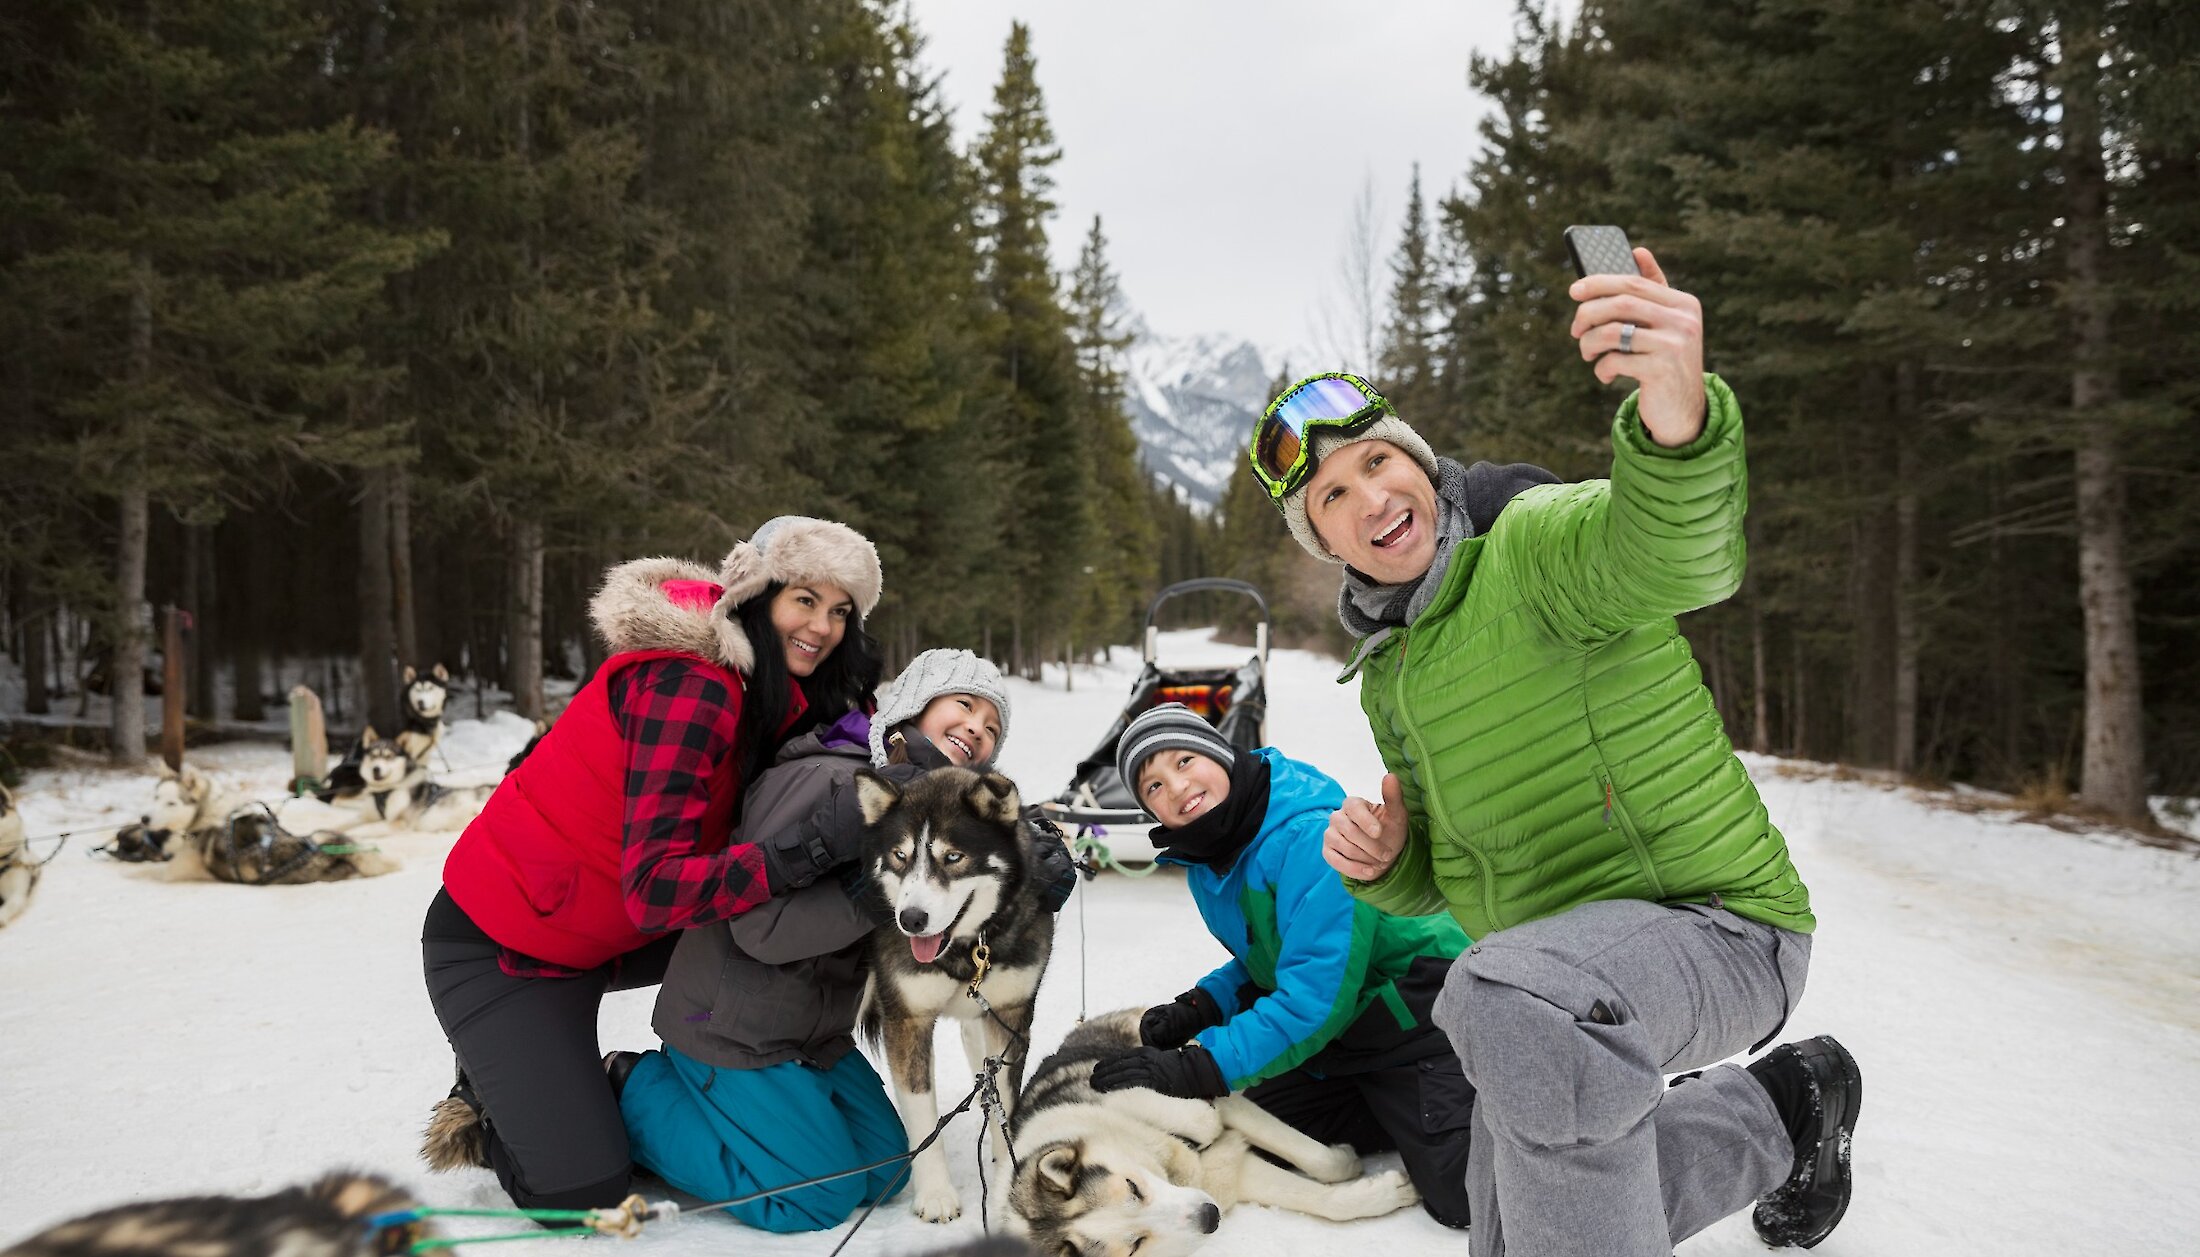 Getting a selfie with the dogsled team